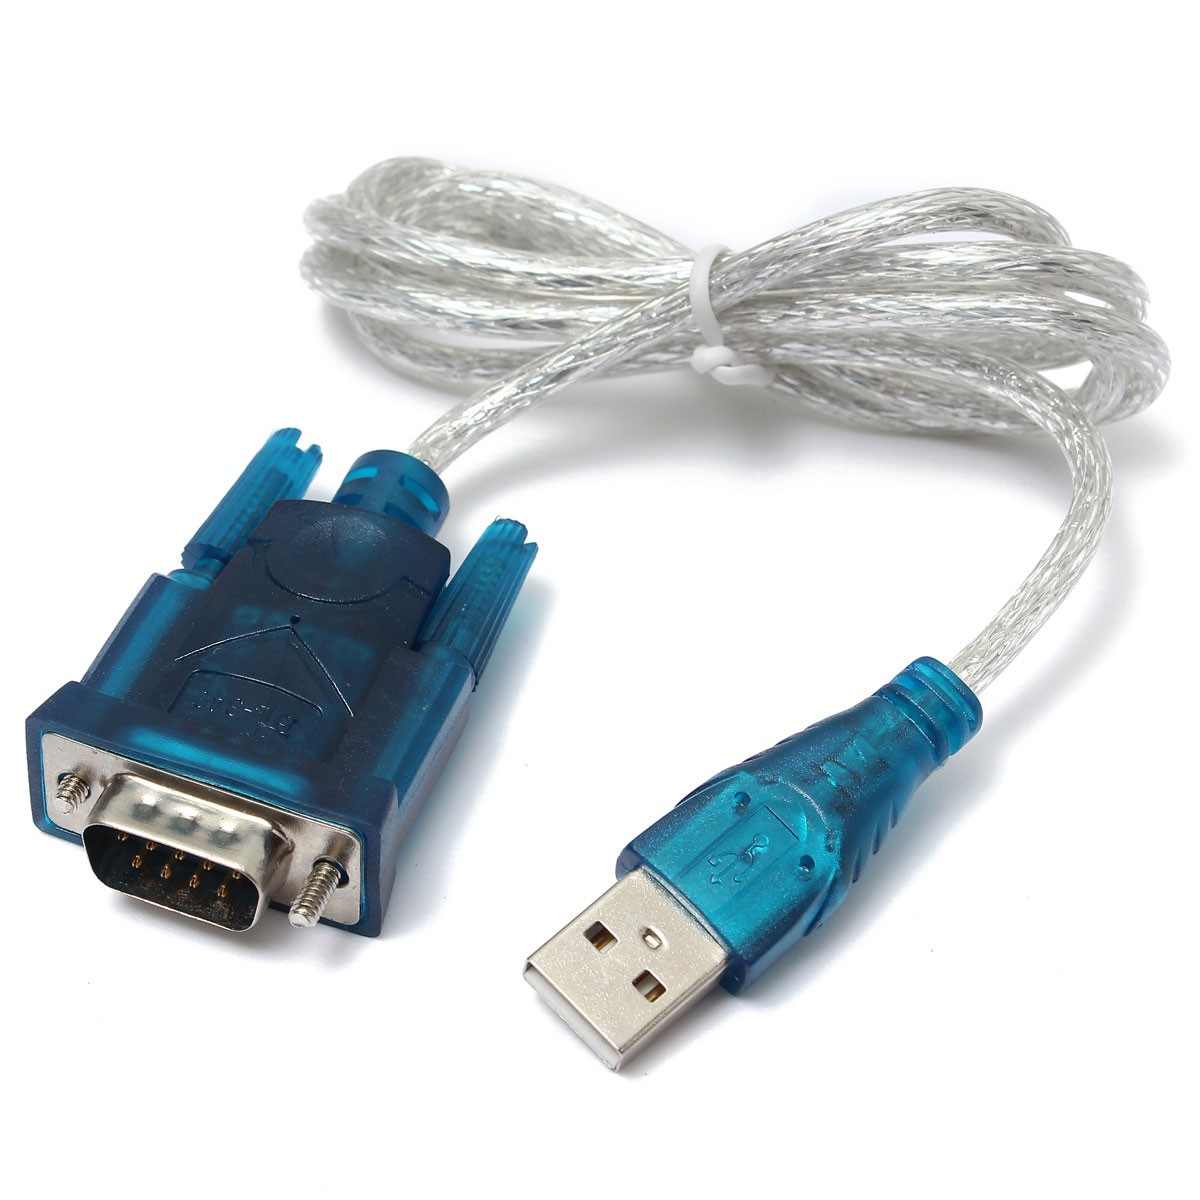 Cable conversor USB a Serial RS232 Puerto serial DB9 2